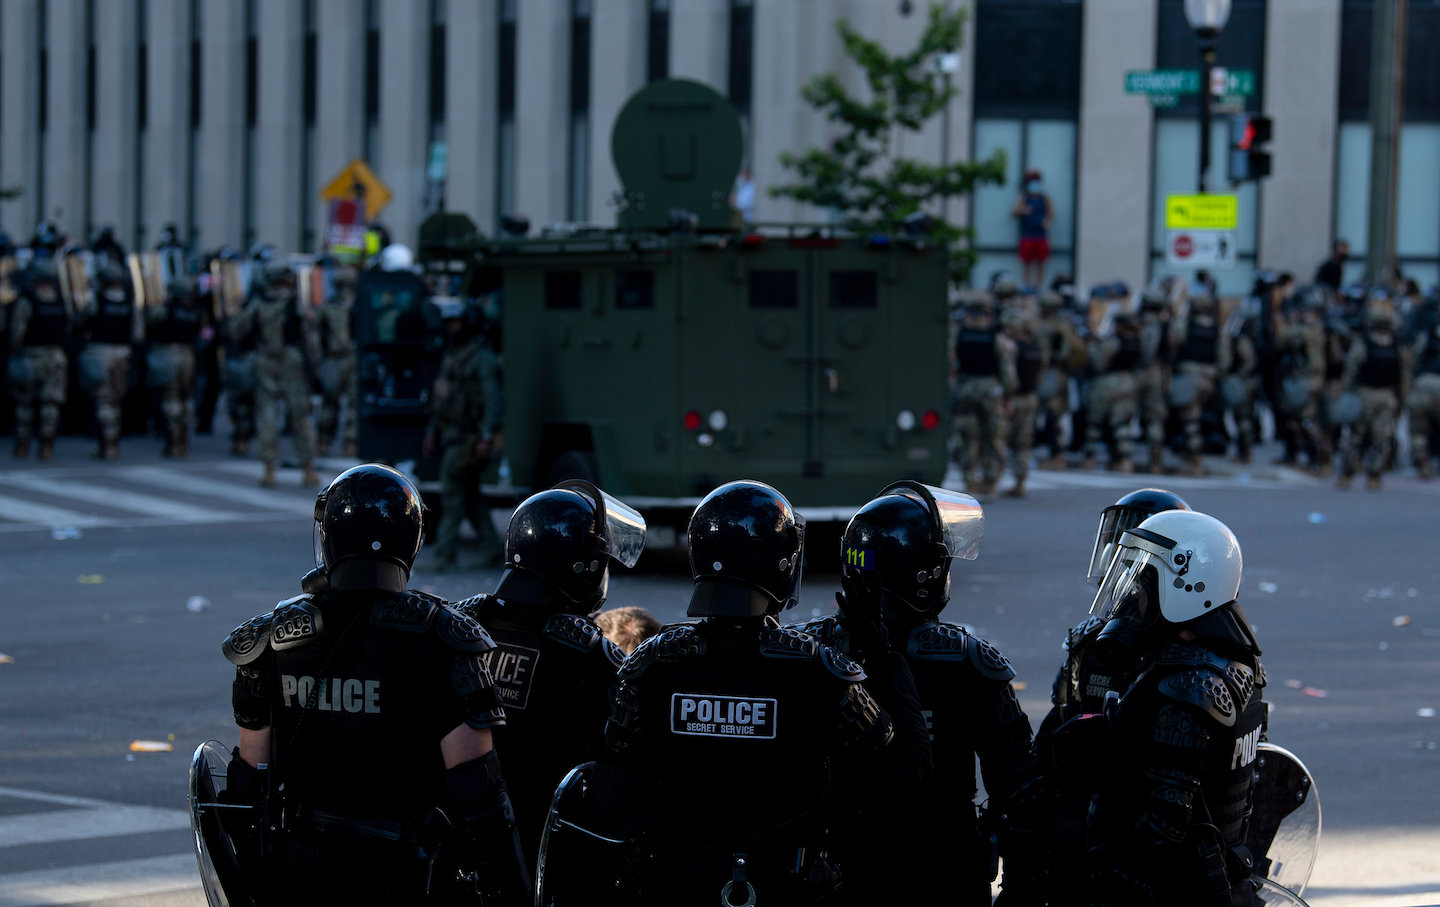 ‘Starve the Beast’: A Q&A With Alex S. Vitale on Defunding the Police